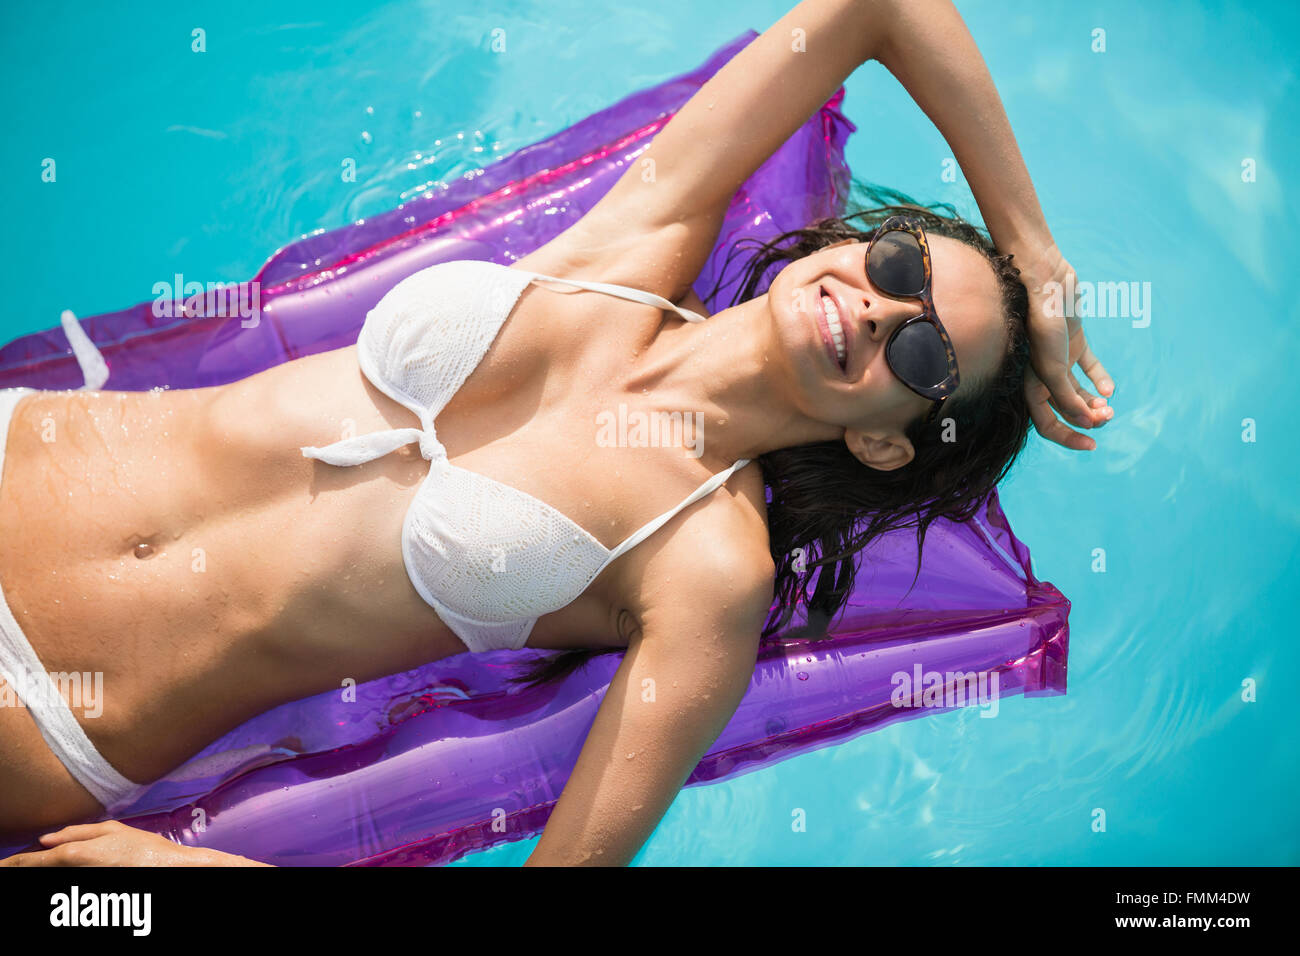 Young woman relaxing on inflatable raft Stock Photo